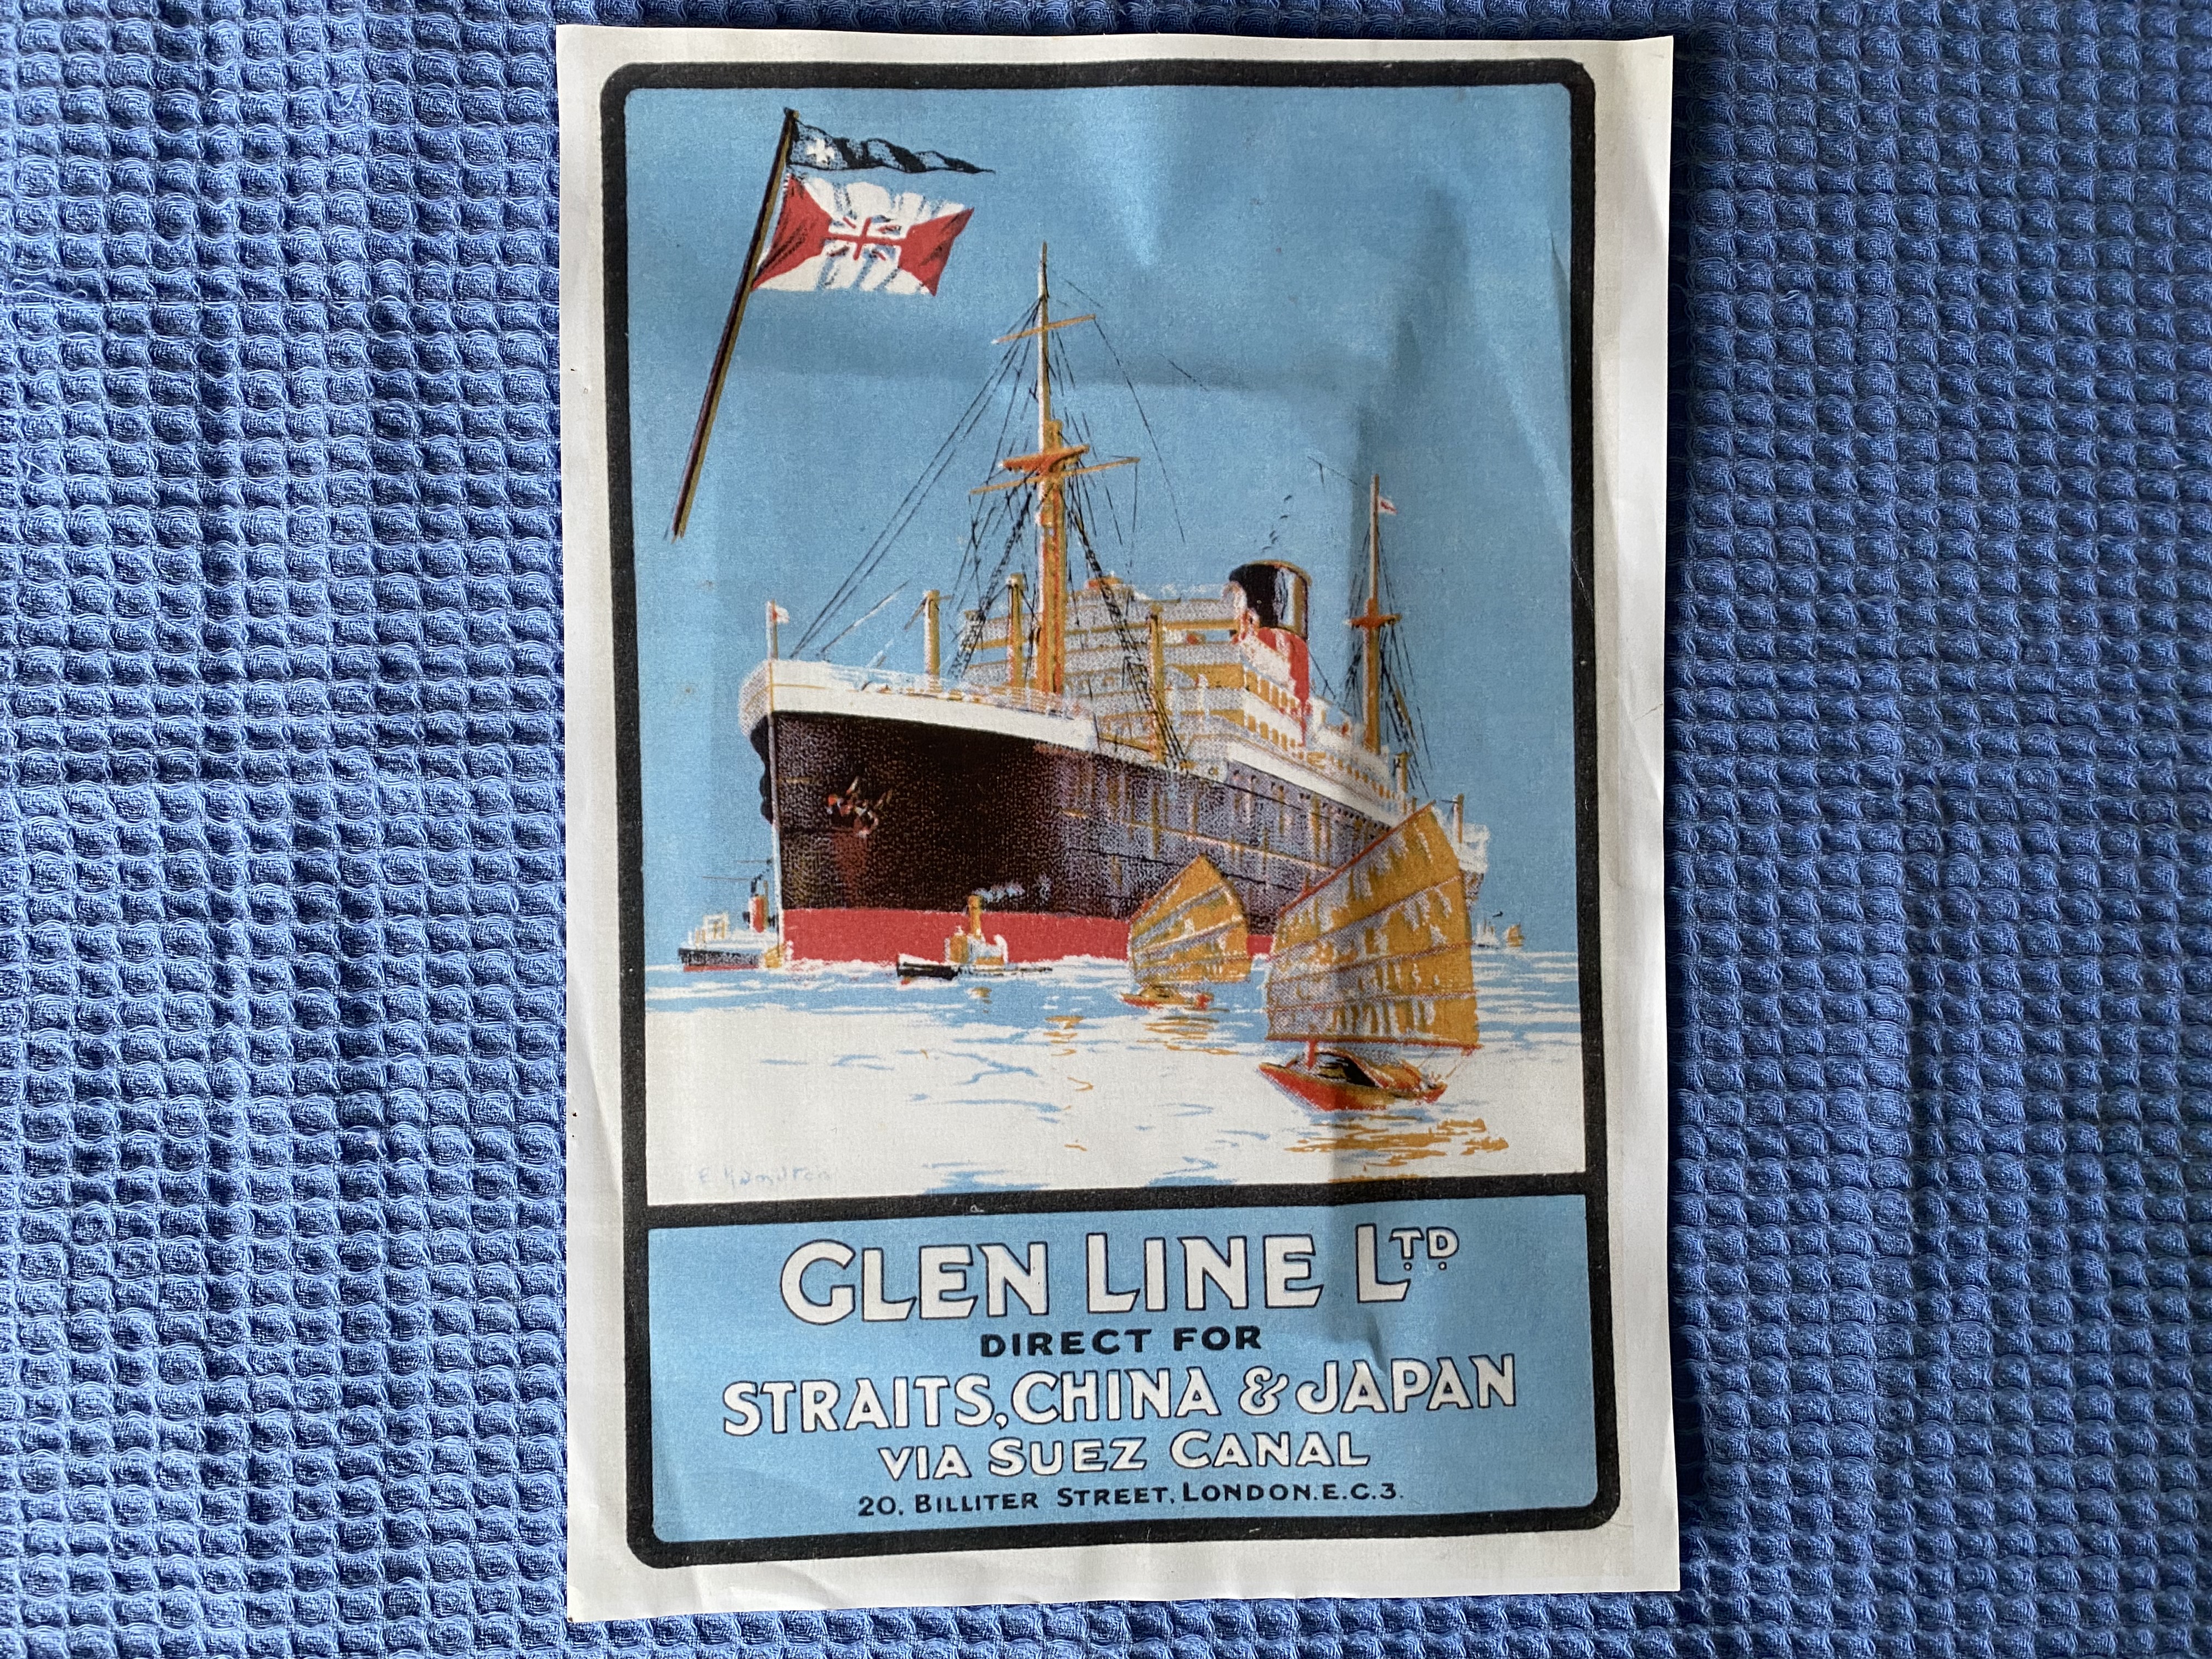 AN ADVERTISING POSTER FROM THE GLEN LINE